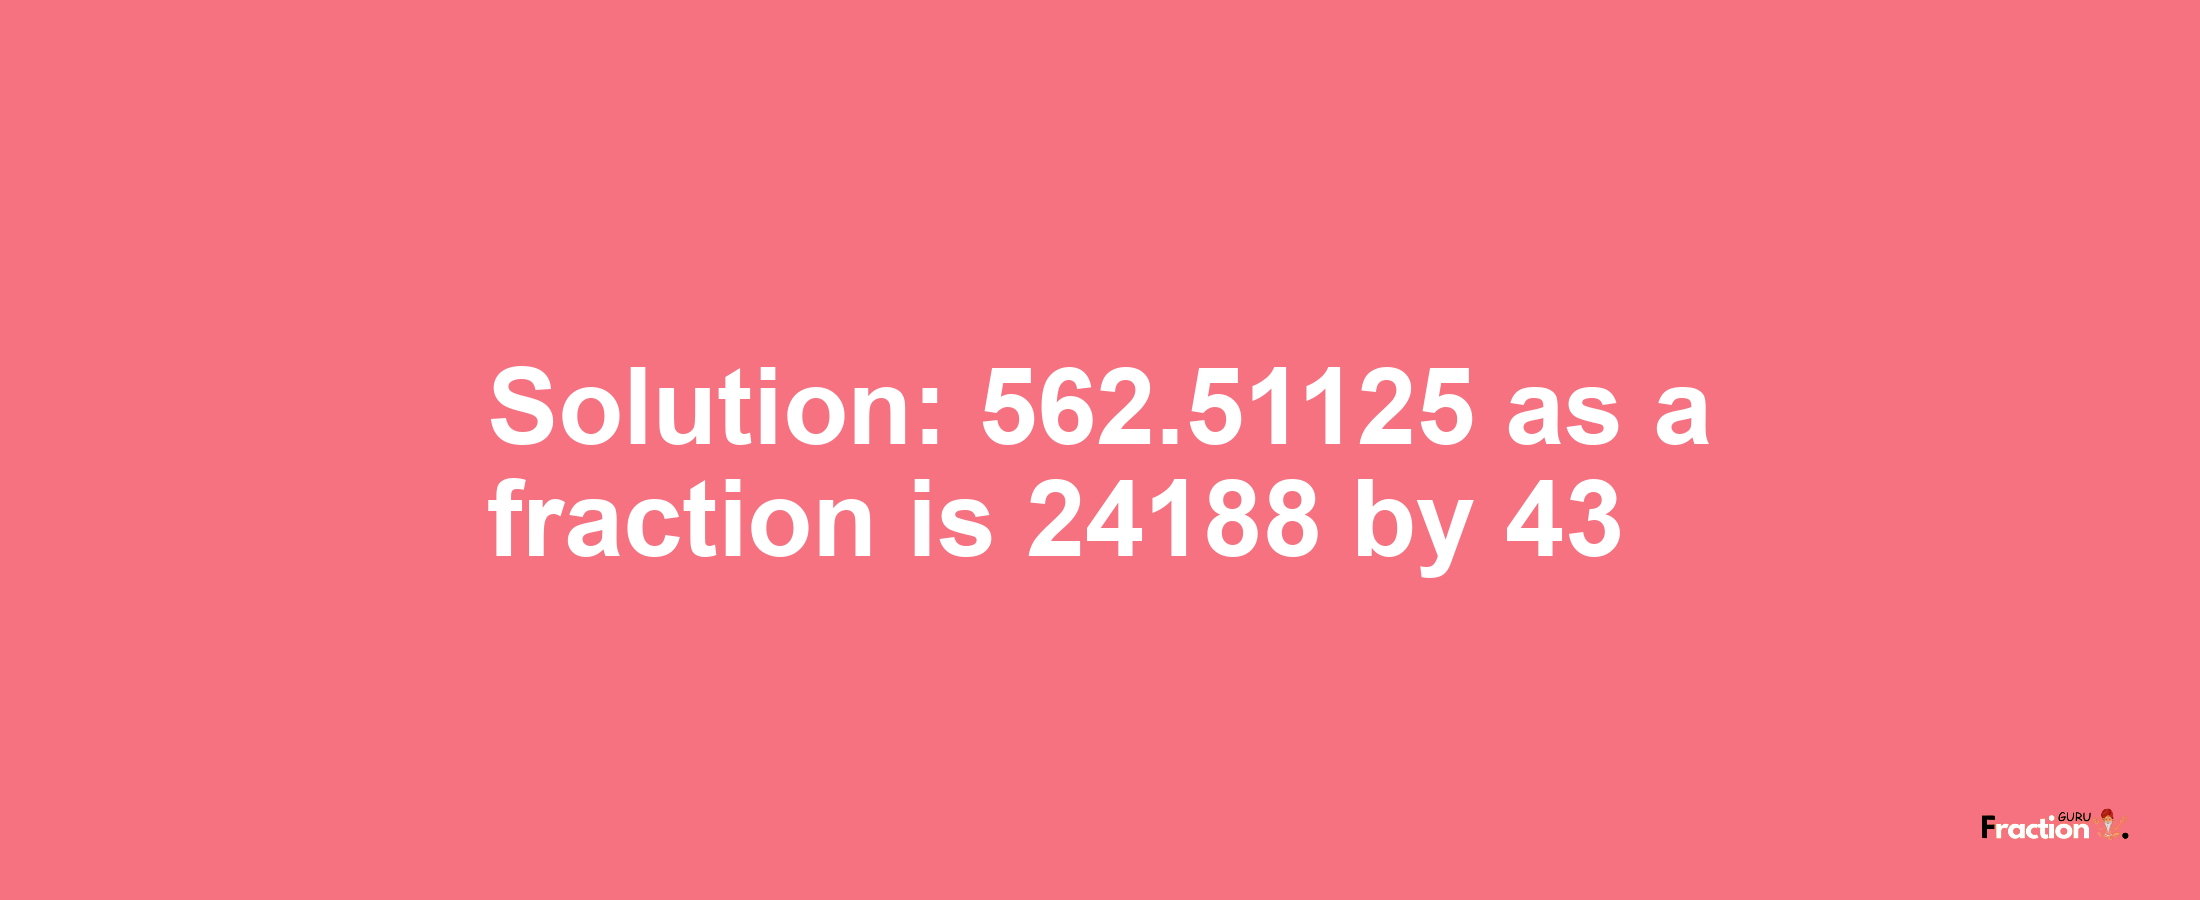 Solution:562.51125 as a fraction is 24188/43